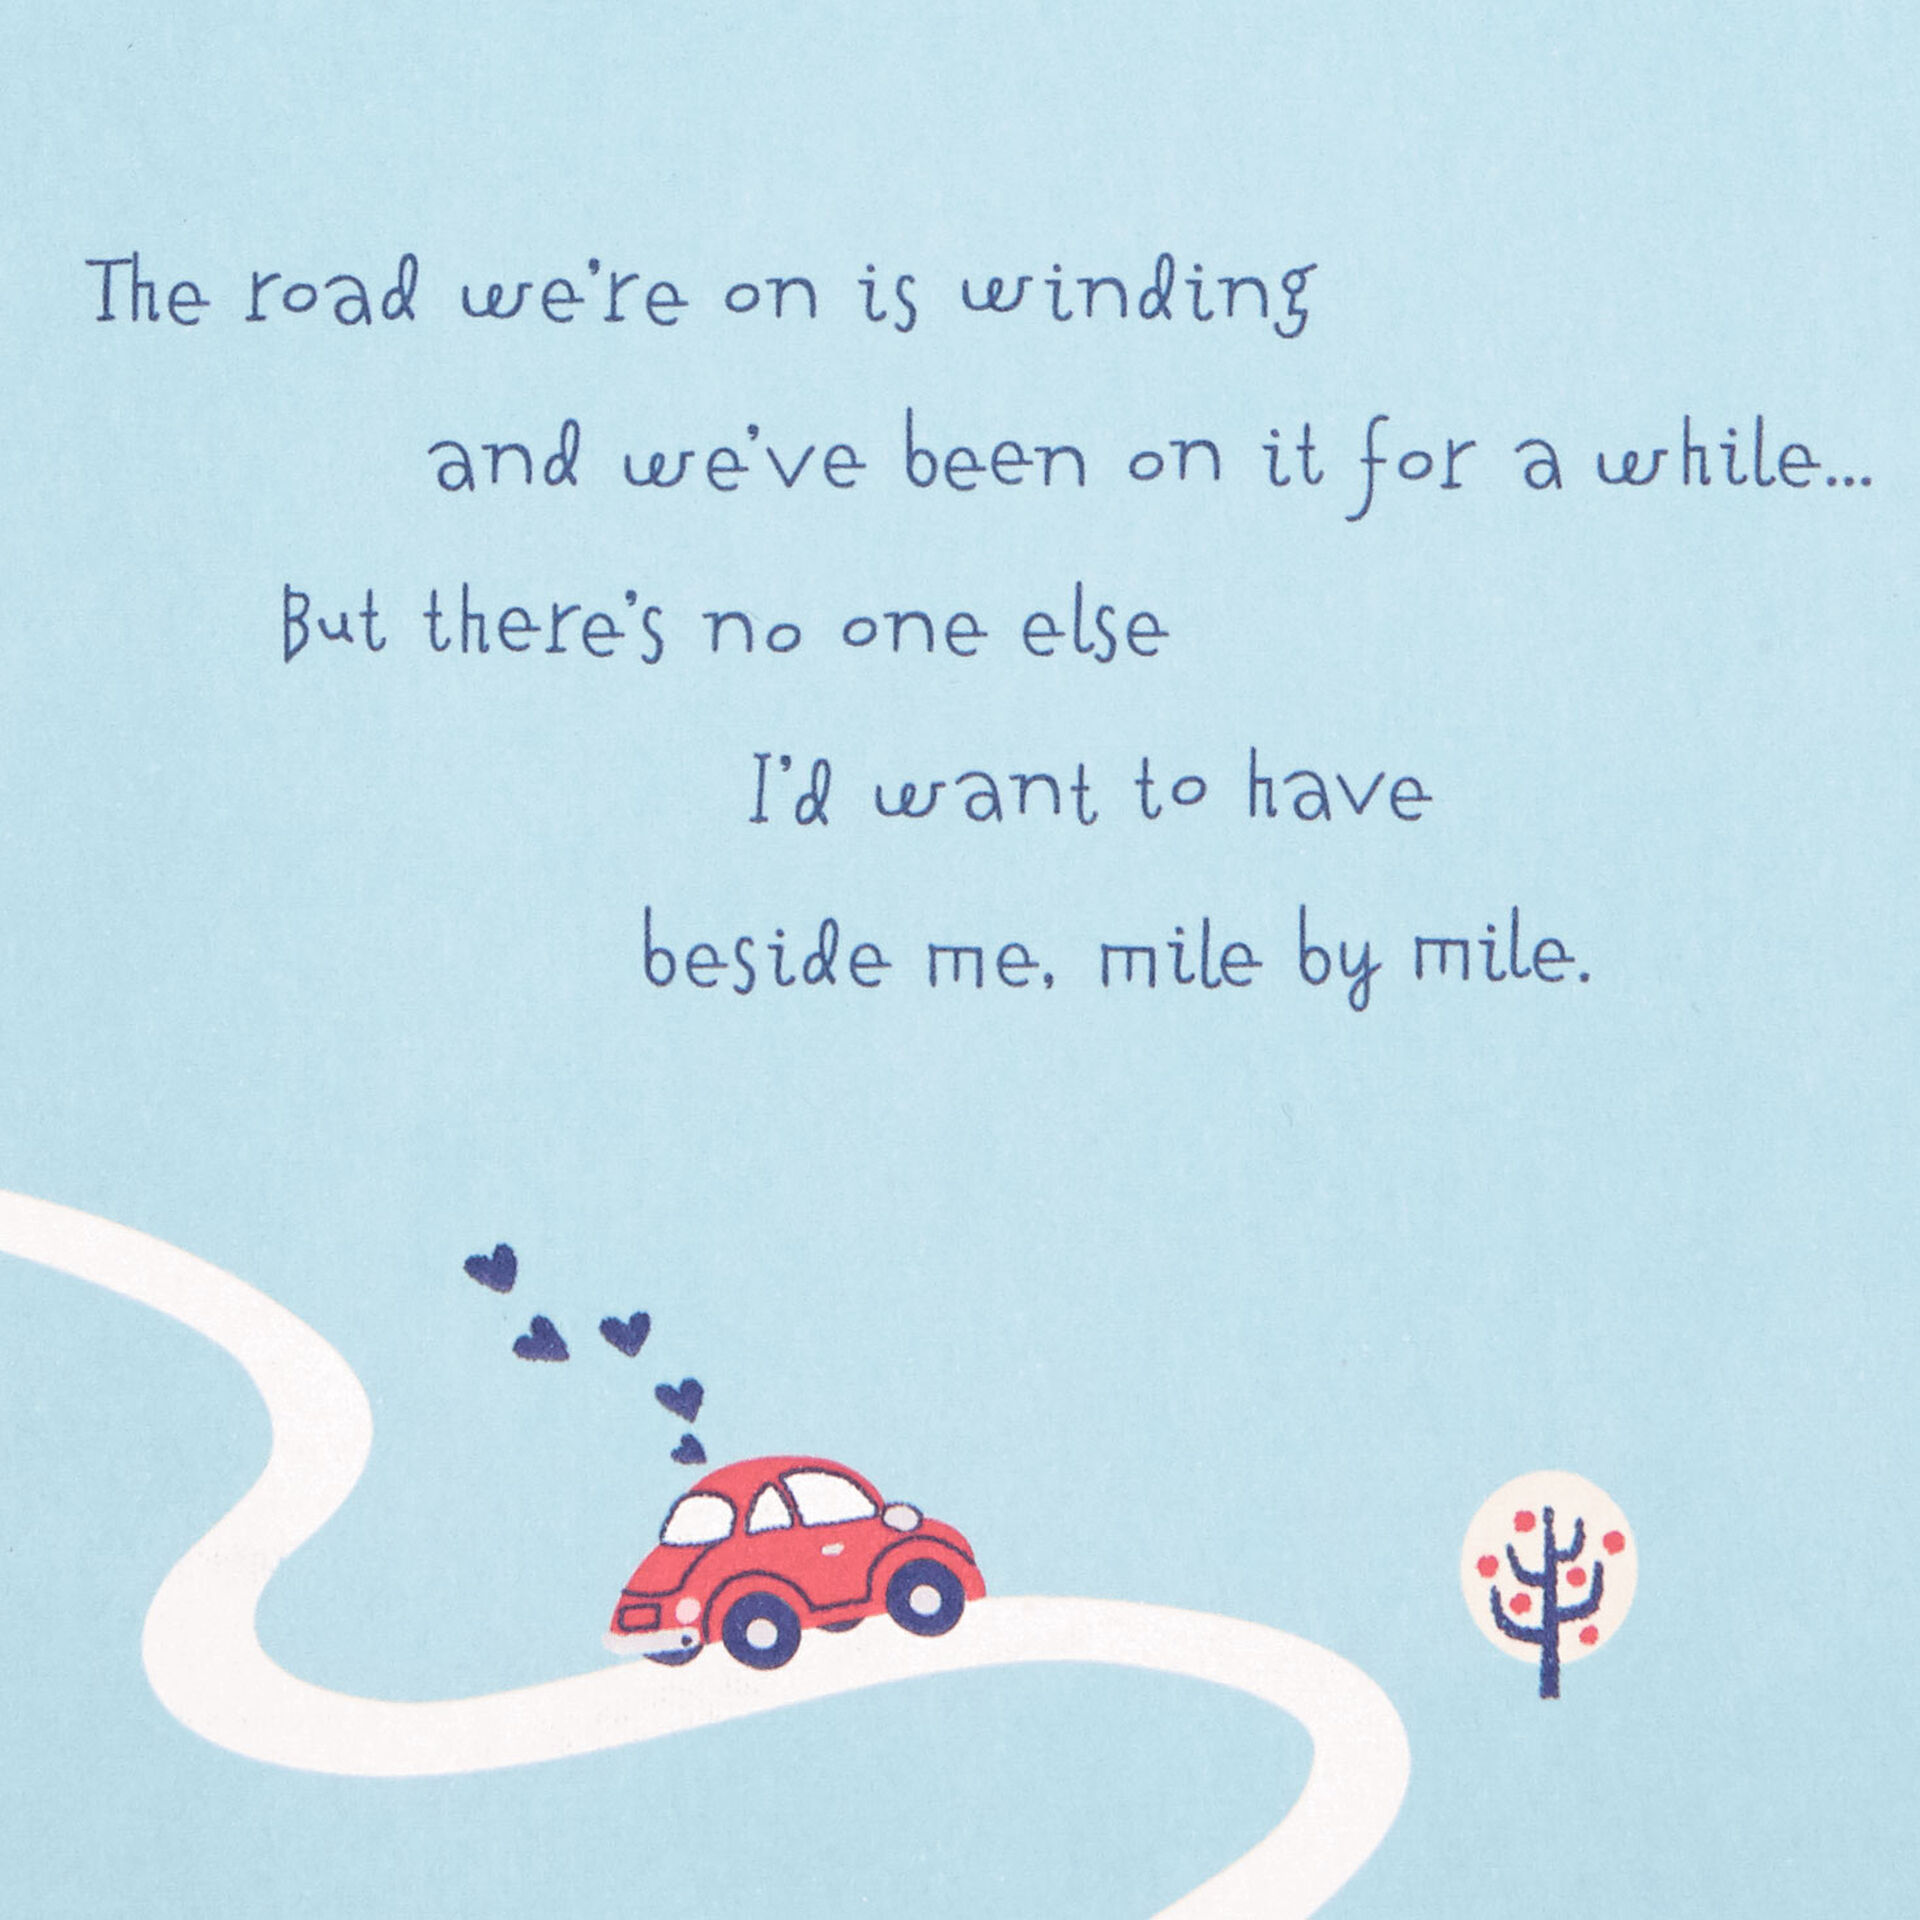 Car-Driving-&-Lovebirds-Anniversary-Card-for-Wife_899AVY2623_02